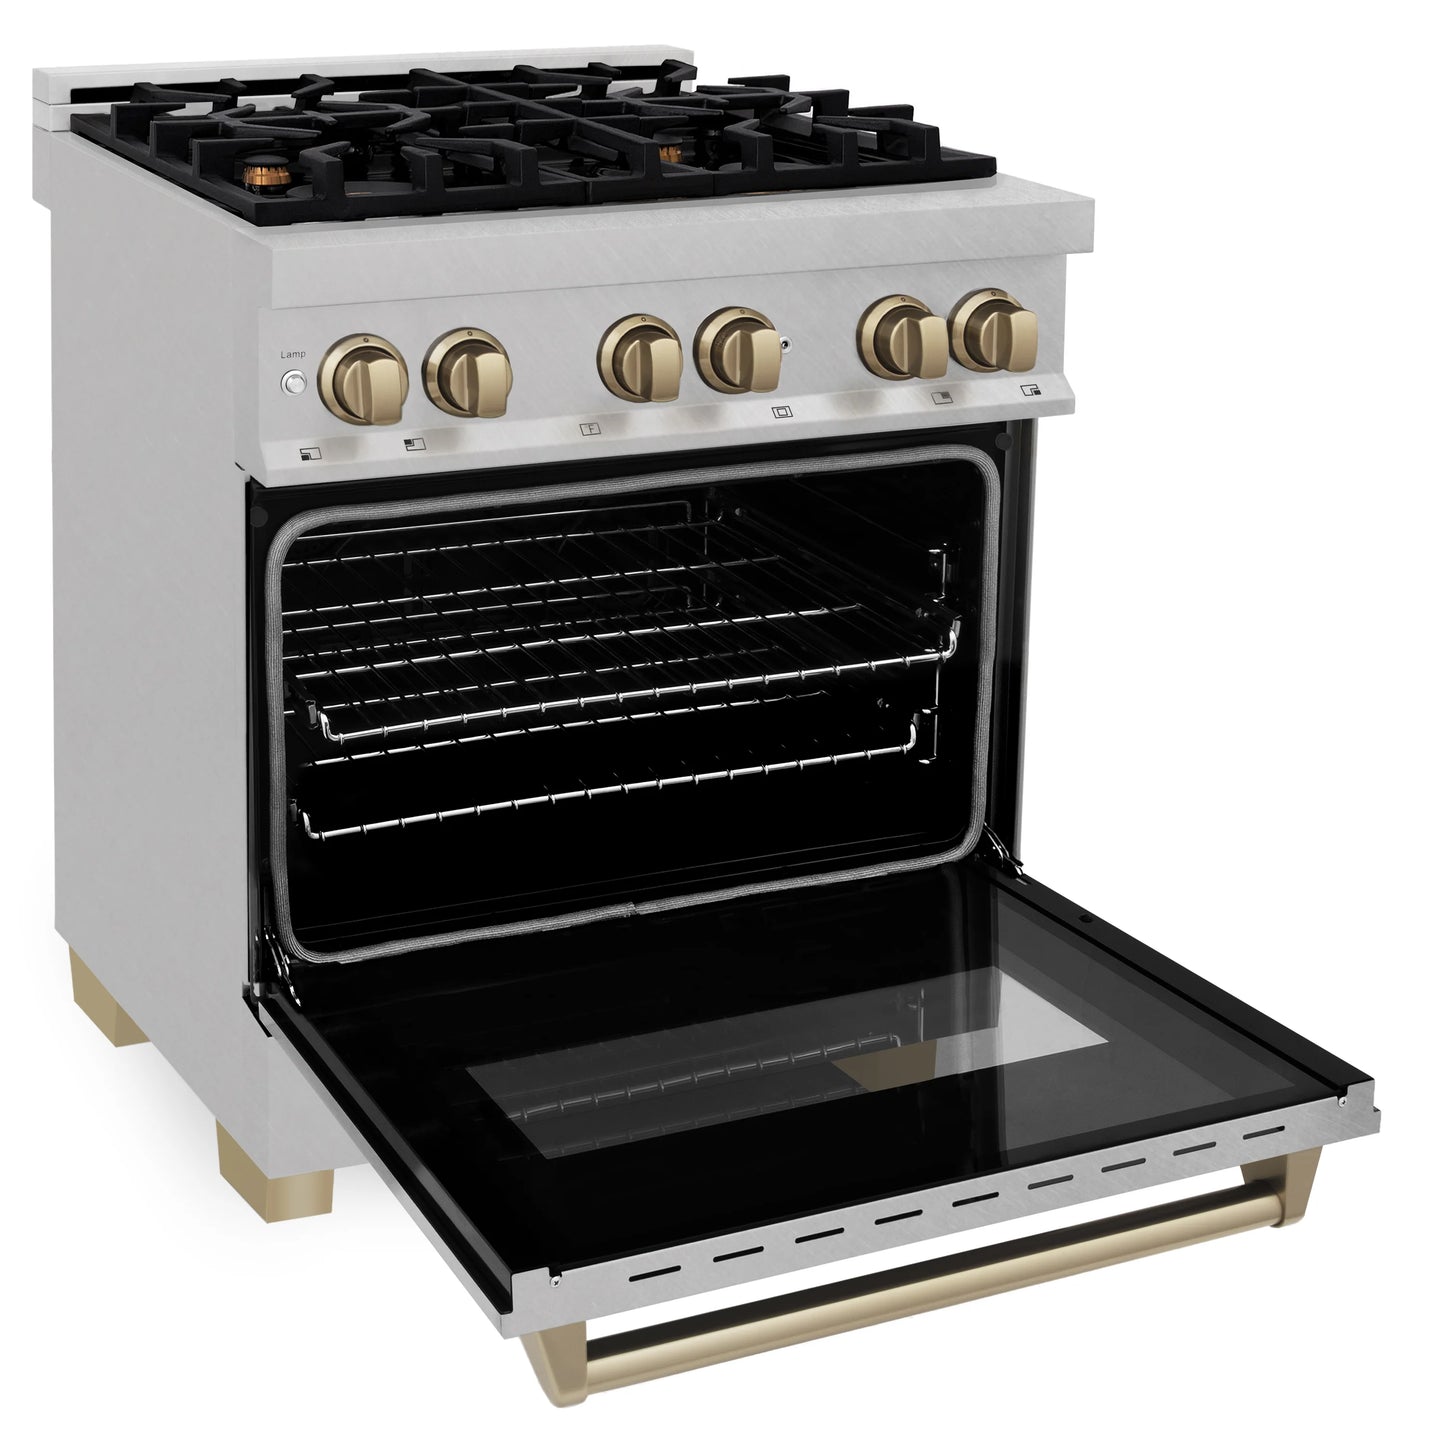 ZLINE Autograph Edition 30 in. with Gas Stove and Electric Oven in DuraSnow Steel with Bronze Accents (RASZ-SN-30-CB)